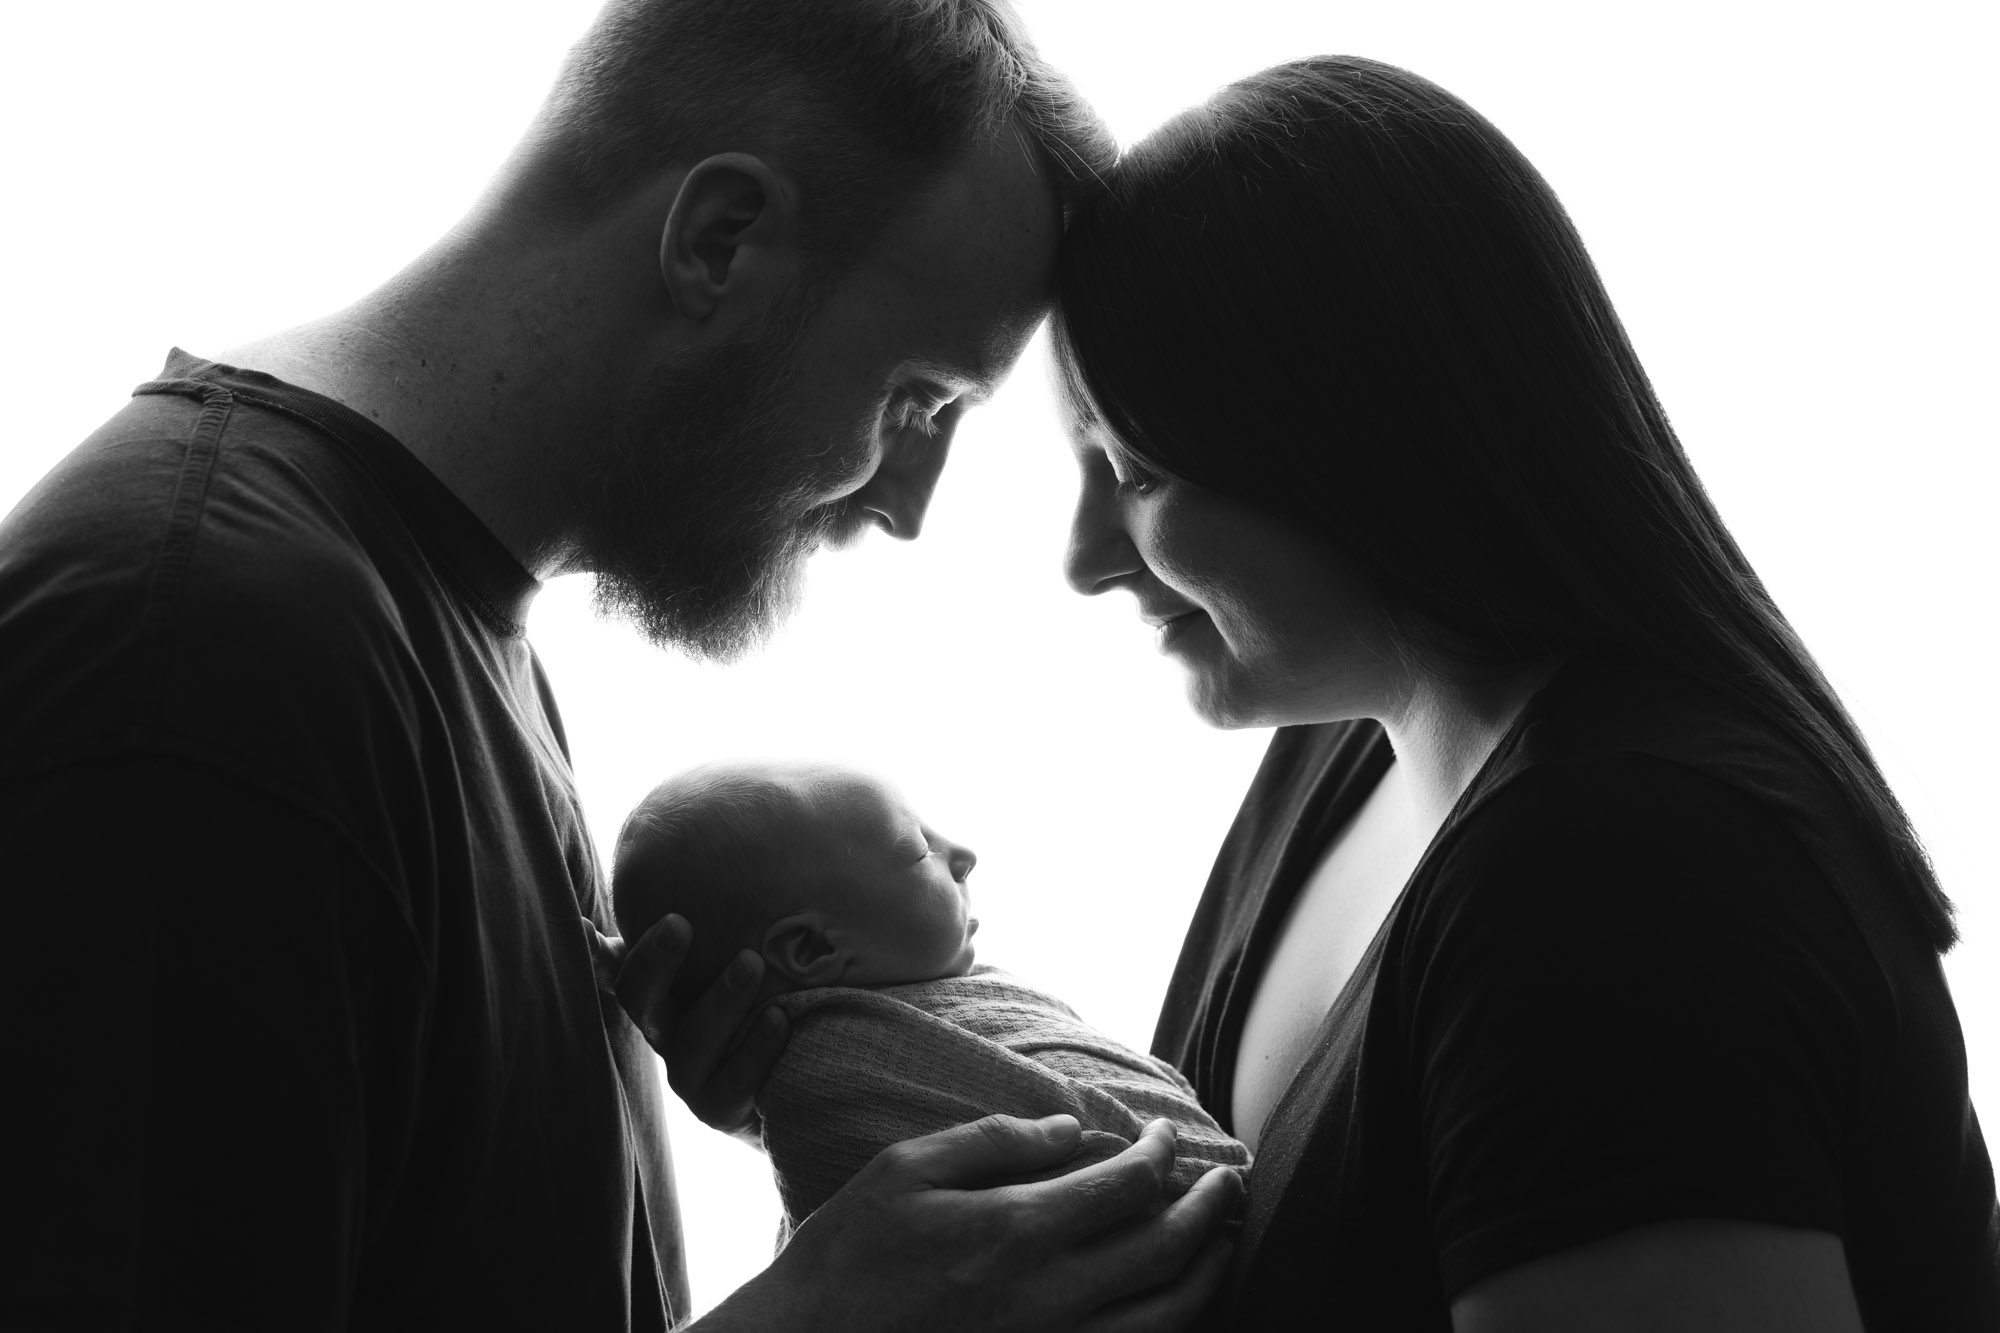 backlit black and white family portrait of parents with baby by newborn photographer edinburgh